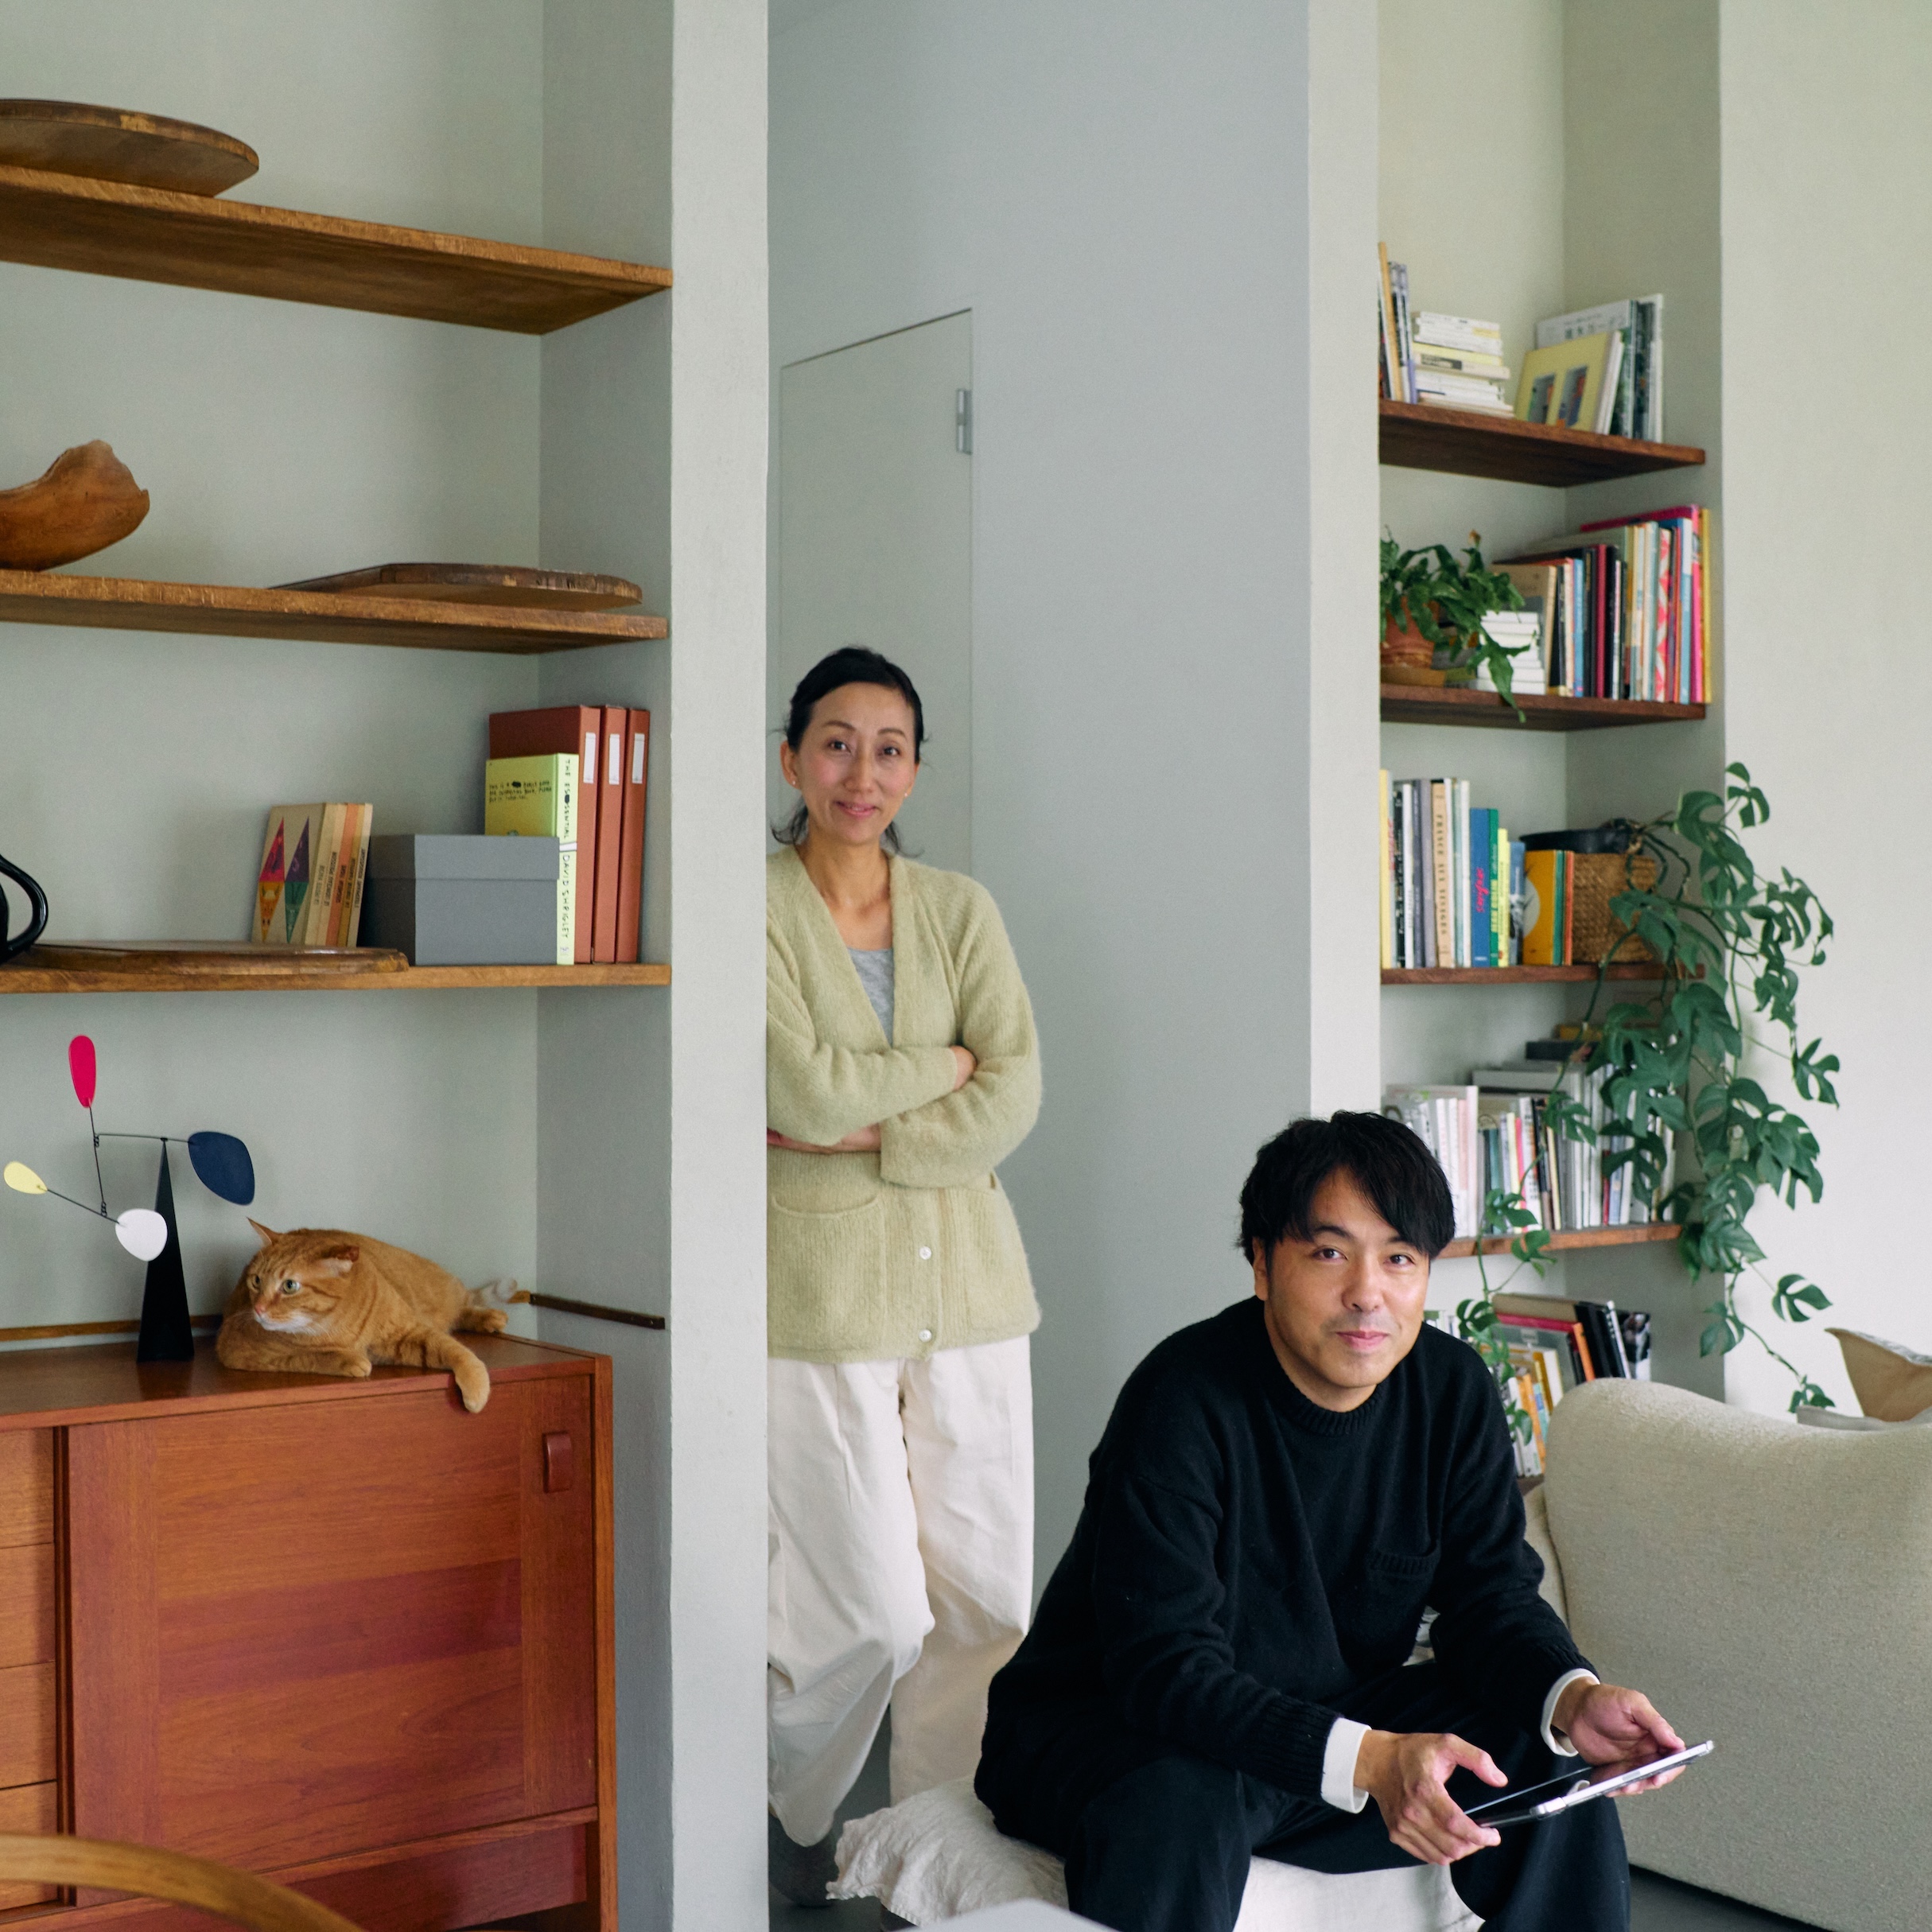 akira tani and kim hyunsook at home in the house they designed in tokyo. 166